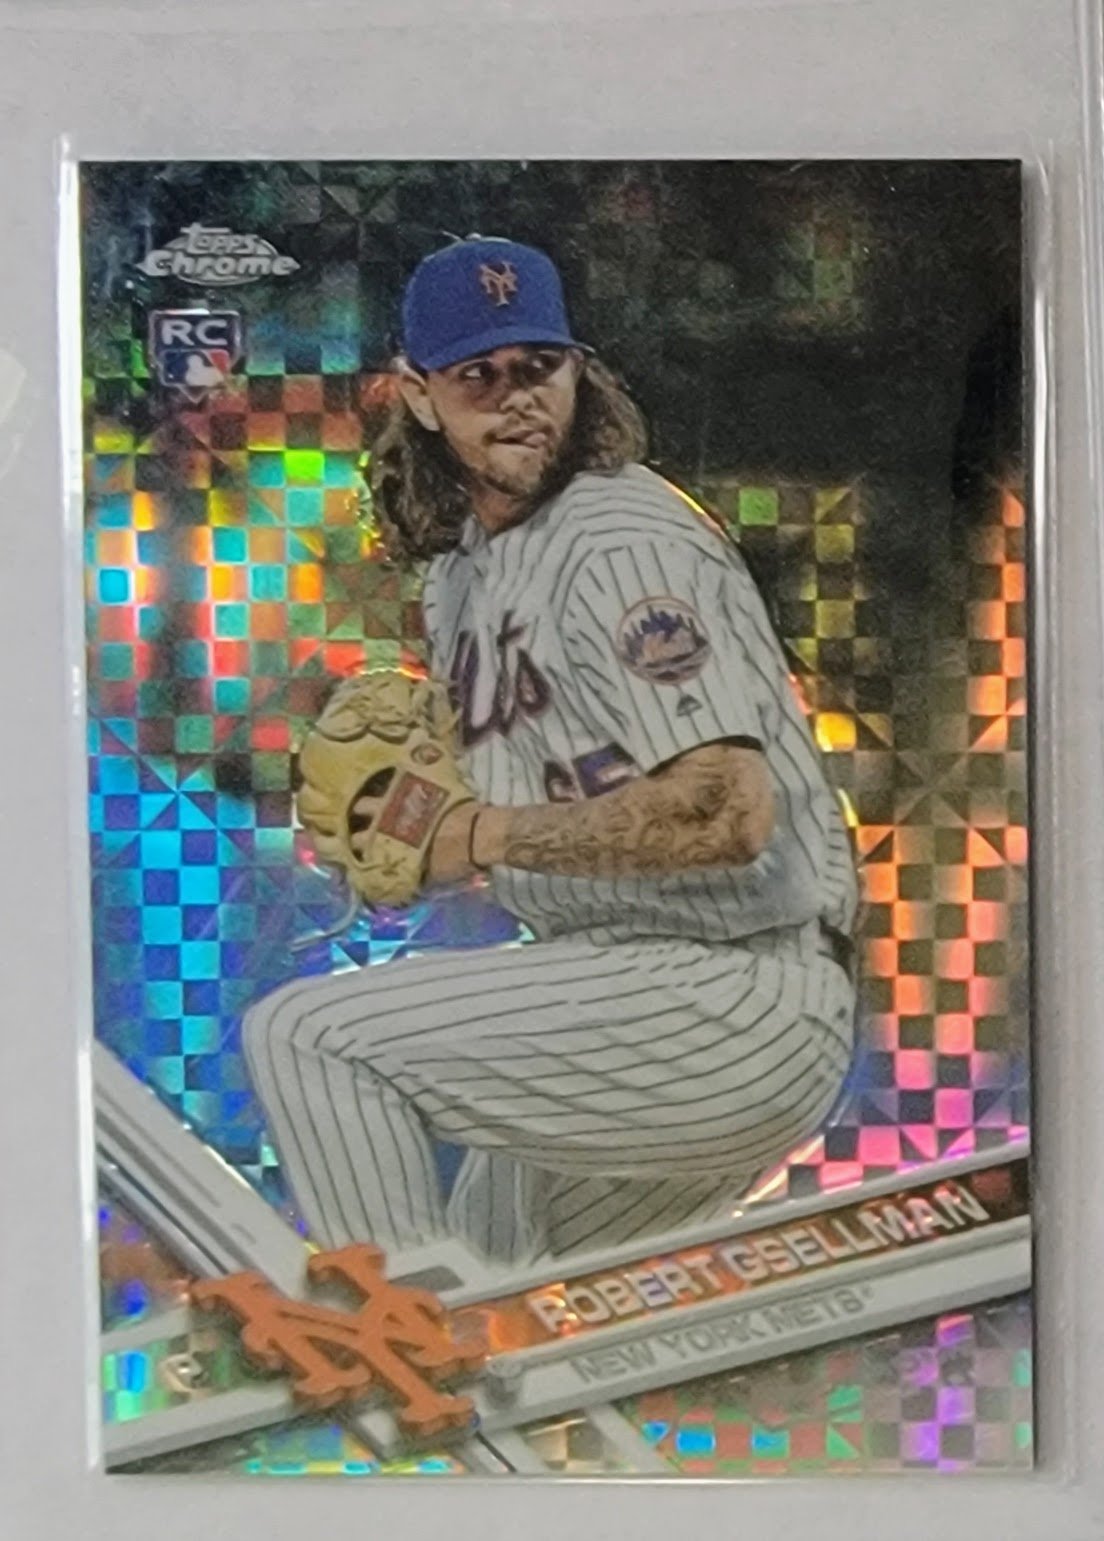 2017 Topps Chrome Robert Gsellman Xfractor Refractor Rookie Baseball Trading Card TPTV simple Xclusive Collectibles   